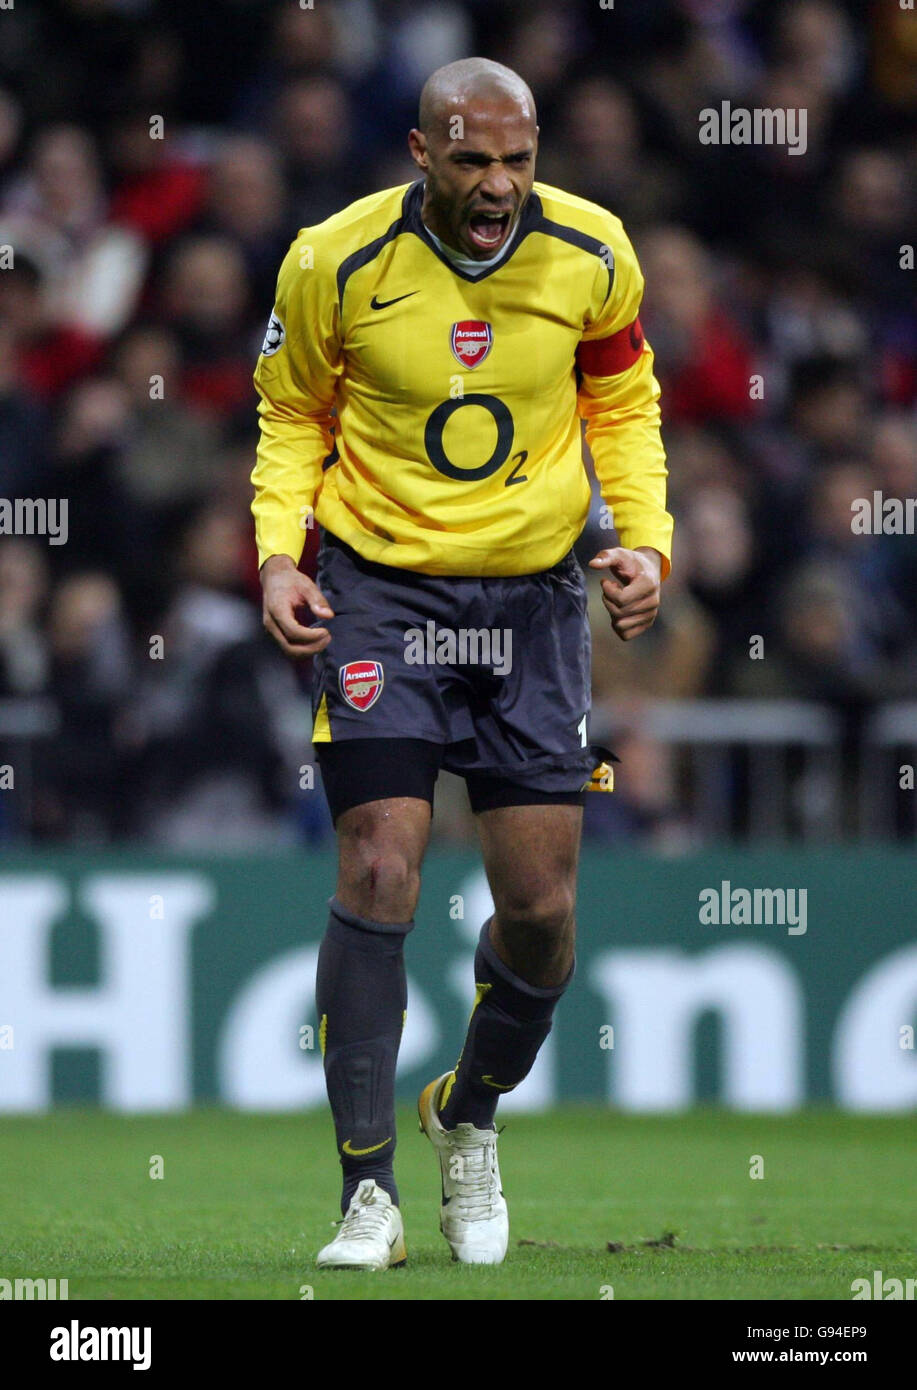 Arsenal's Thierry Henry shows his frustration at team-mates during the UEFA Champions League match against Real Madrid at the Santiago Bernabeu, Madrid, Spain, Tuesday February 21, 2006. PRESS ASSOCIATION Photo. Photo credit should read: Nick Potts/PA. Stock Photo